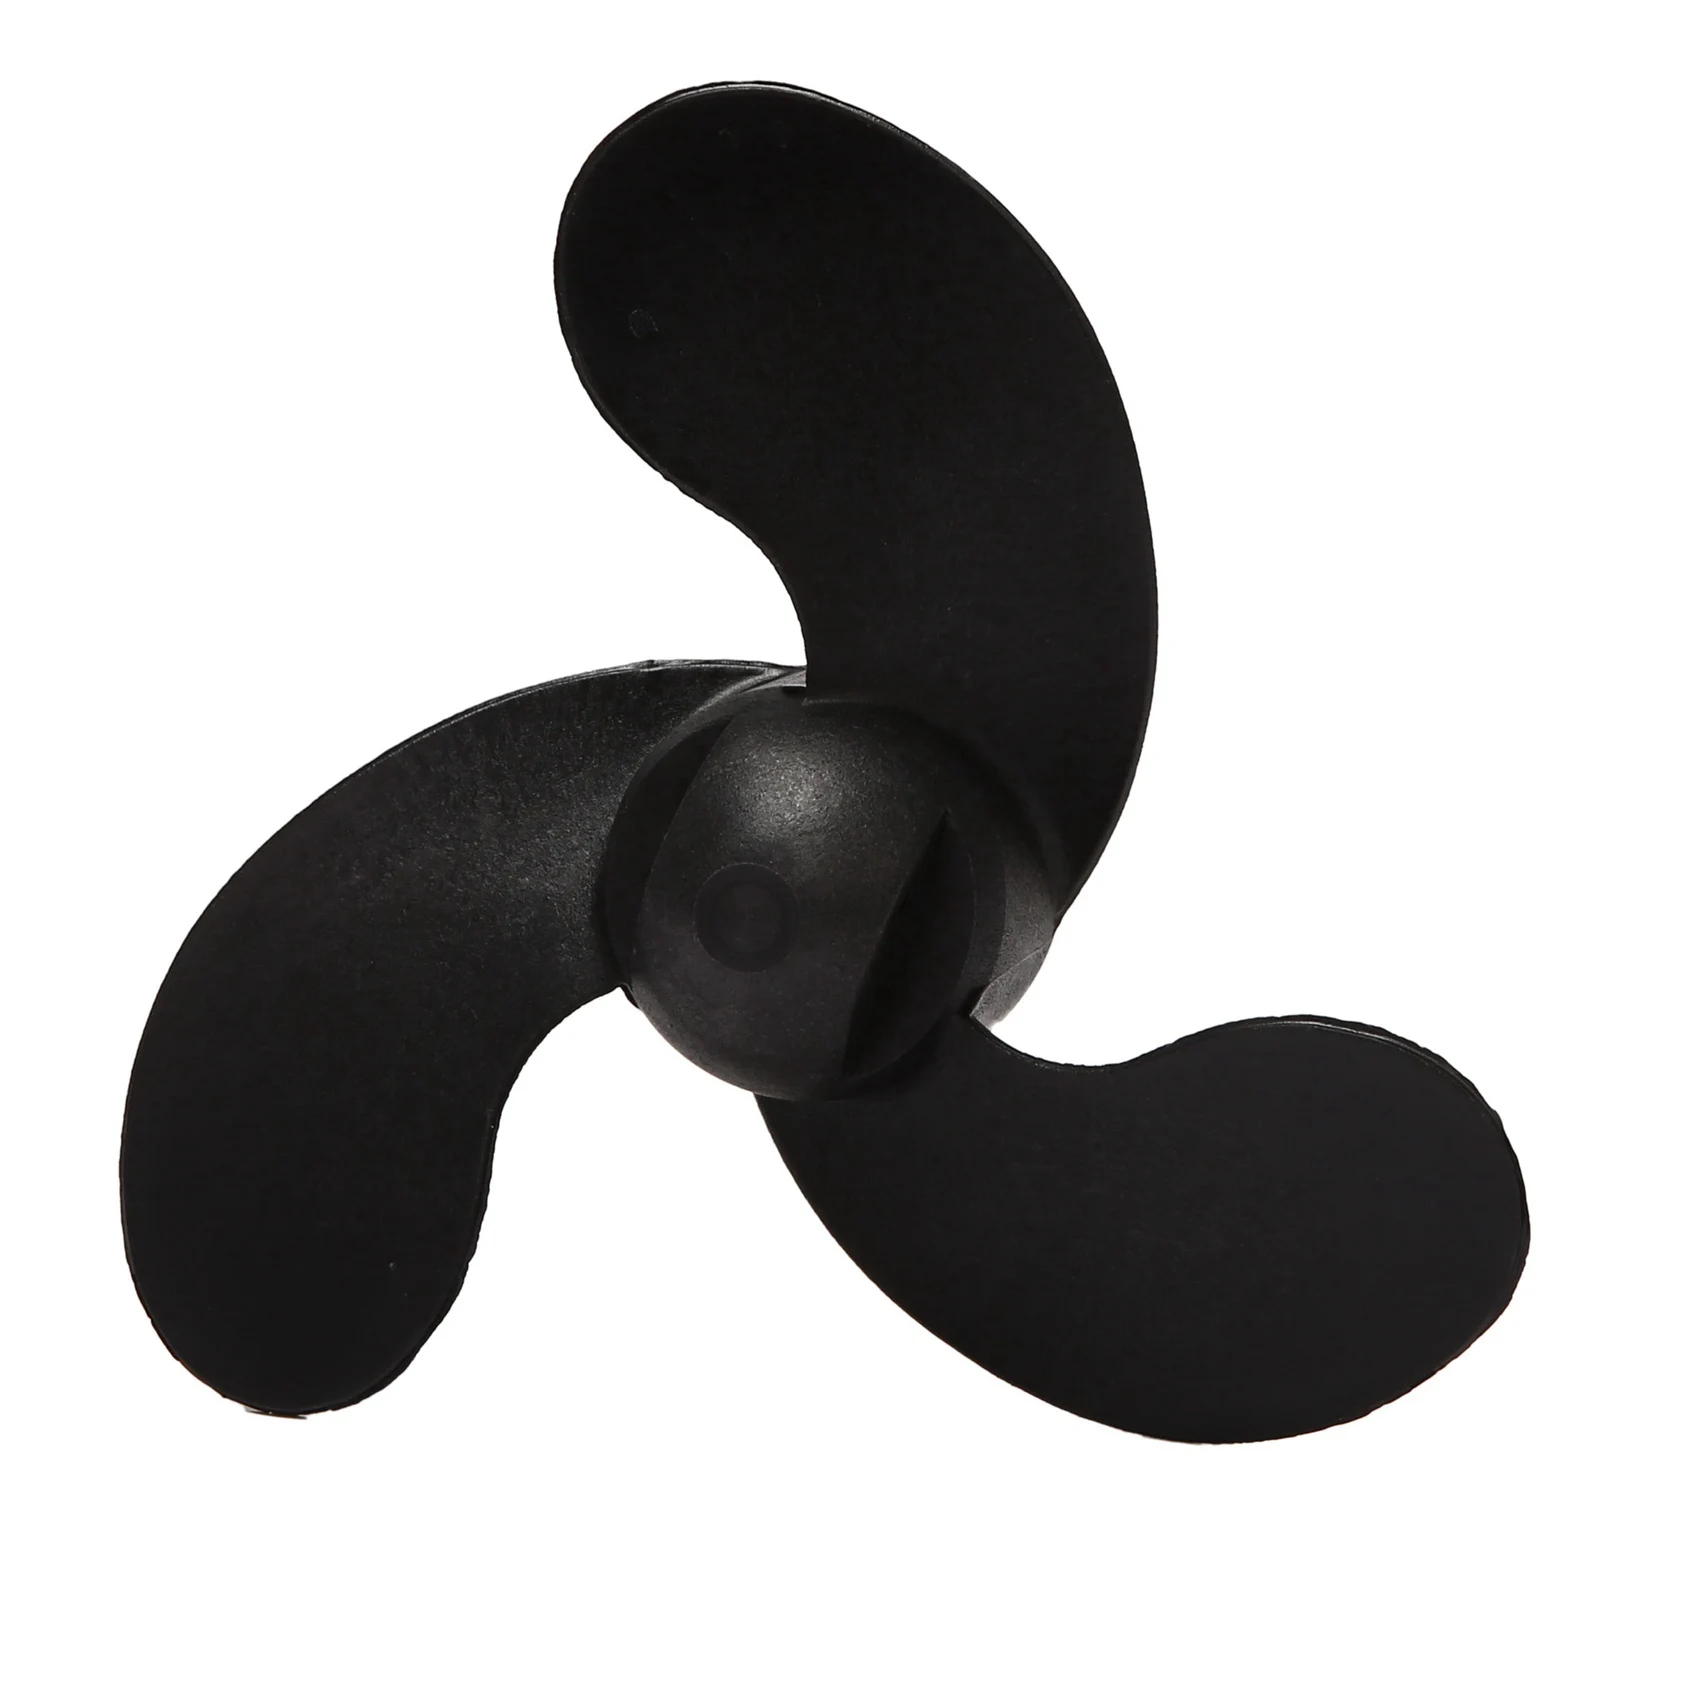 

2X 3 Black Leaves Marine Outboard Propeller for Mercury/Nissan/Tohatsu 3.5/2.5HP 47.05mm(Diameter) x 78.05mm(Pitch)